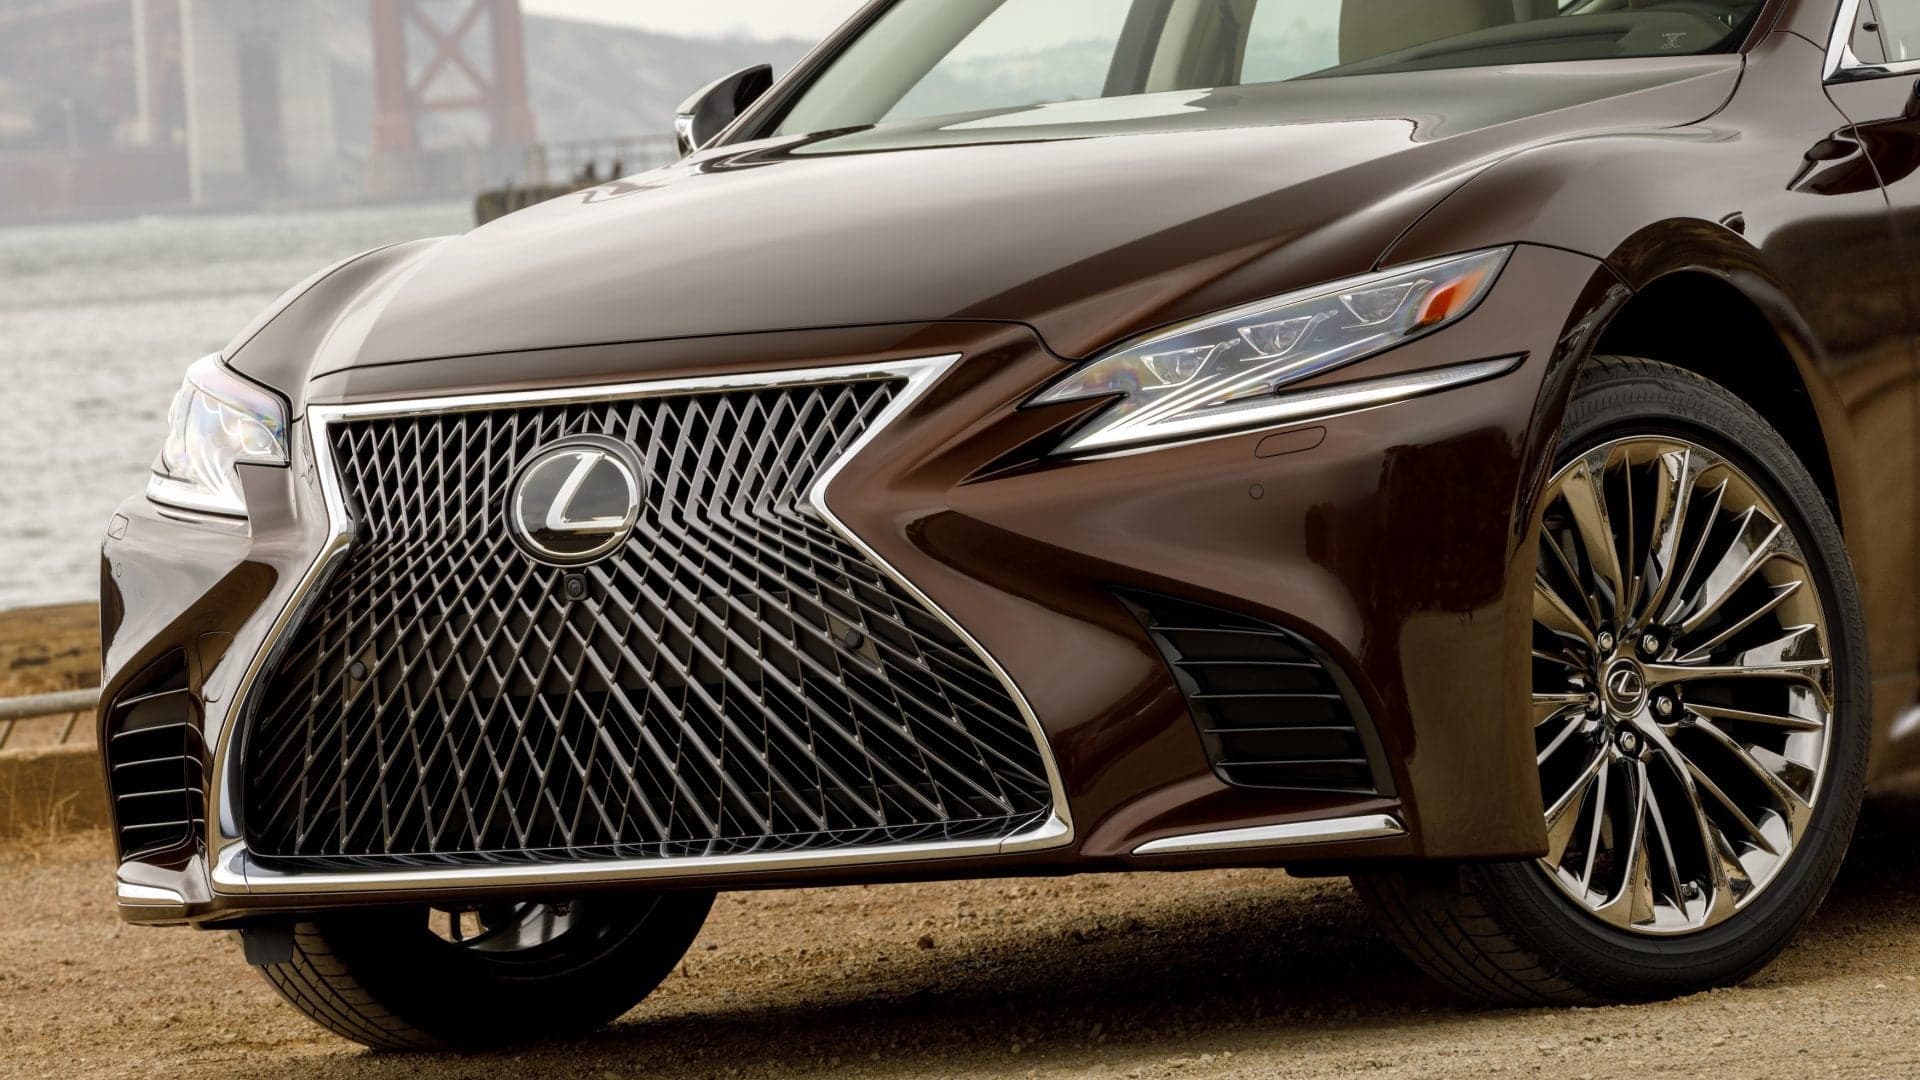 Lexus Fields Complaints From Longtime Owners Over Spindle Grille